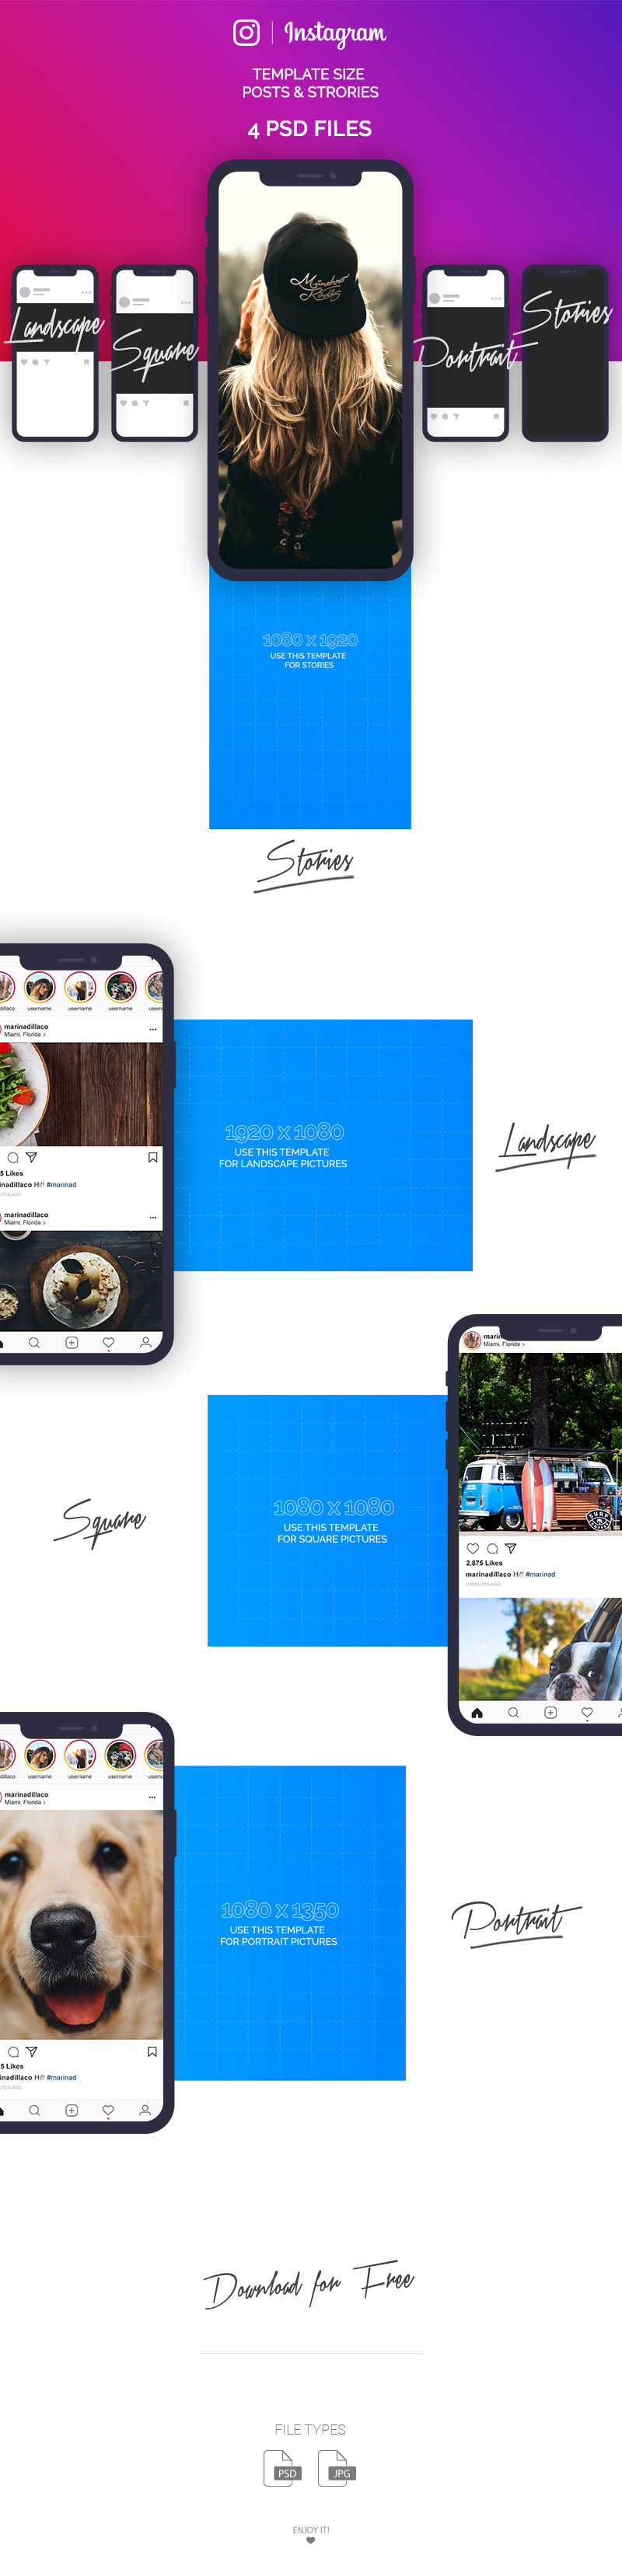 instagram images sizes dimensions template mockup